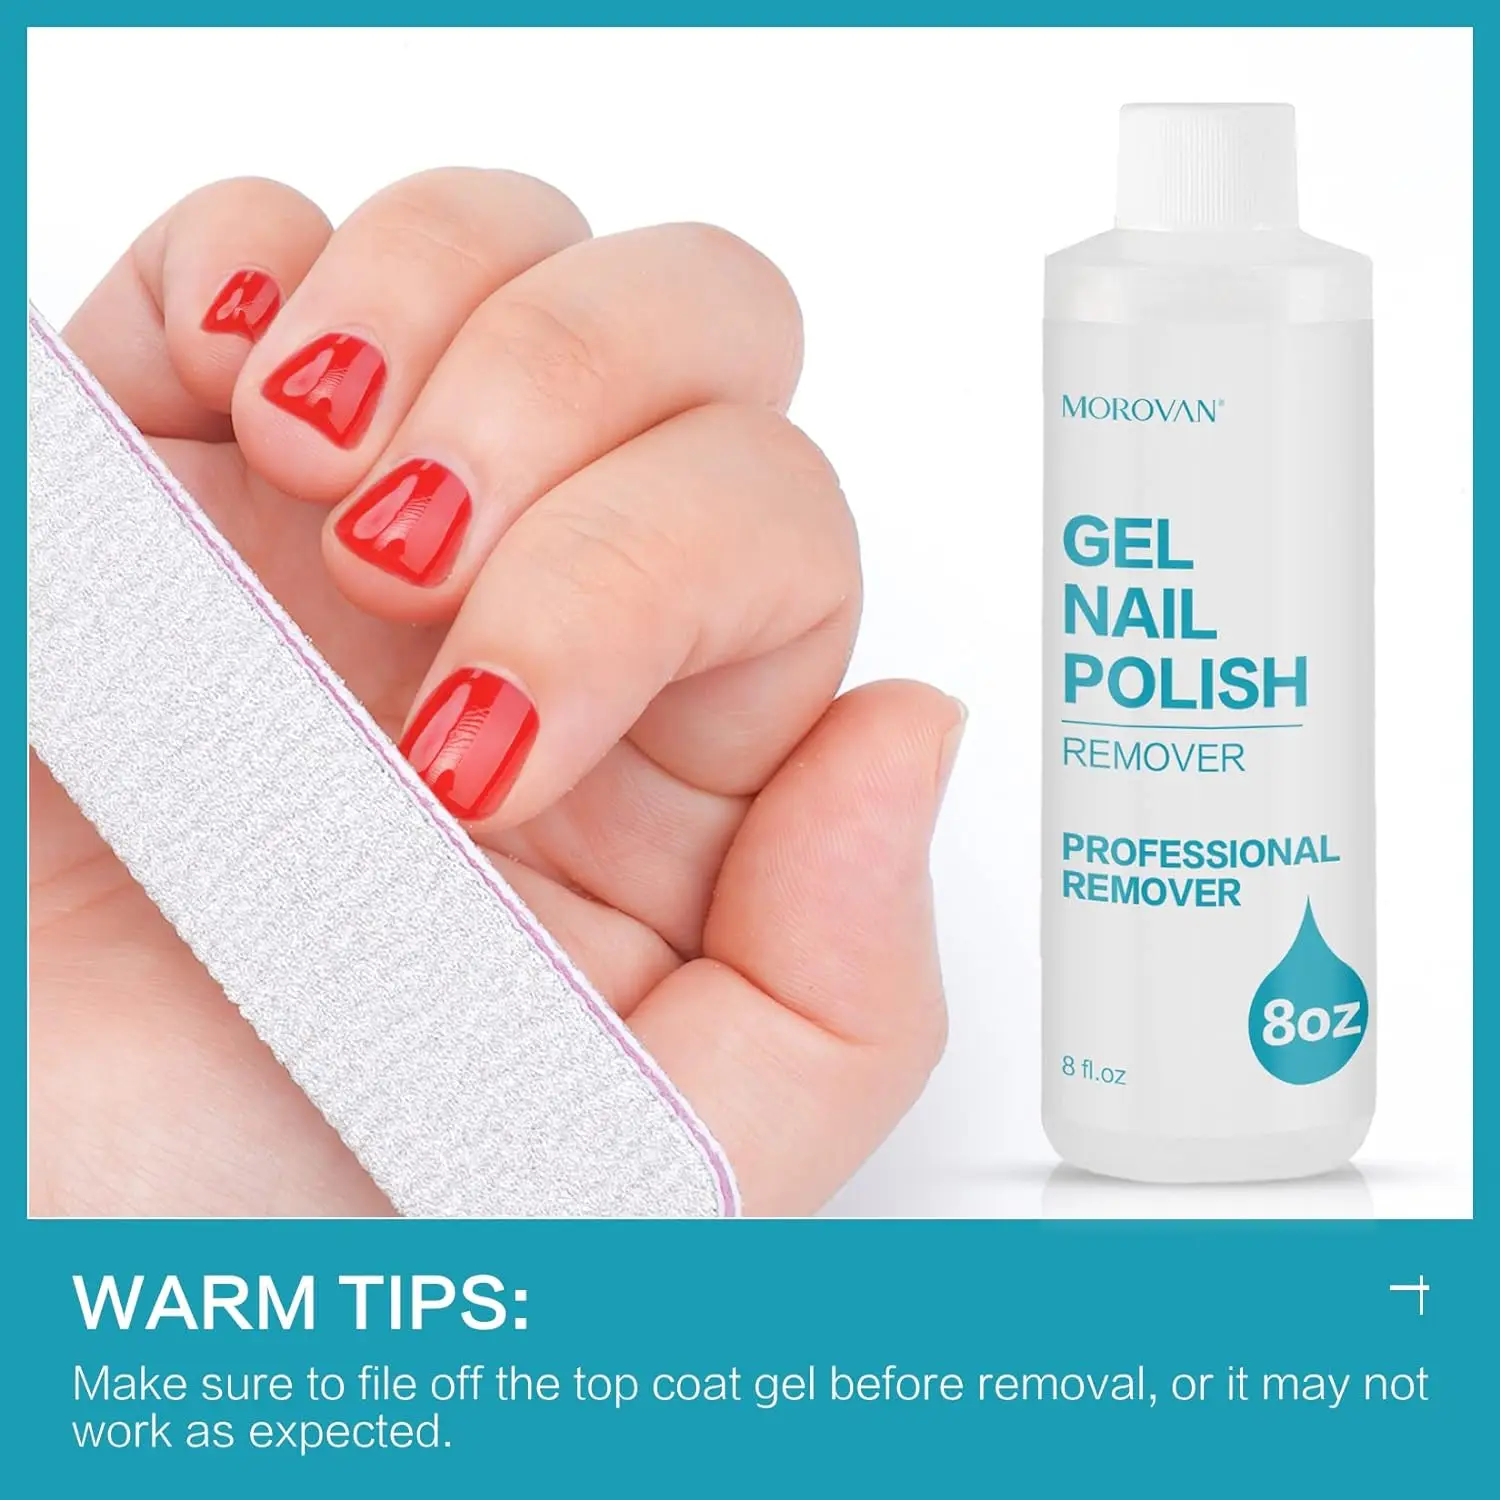 How To Remove Gel Nail Polish At Home? - Boldsky.com